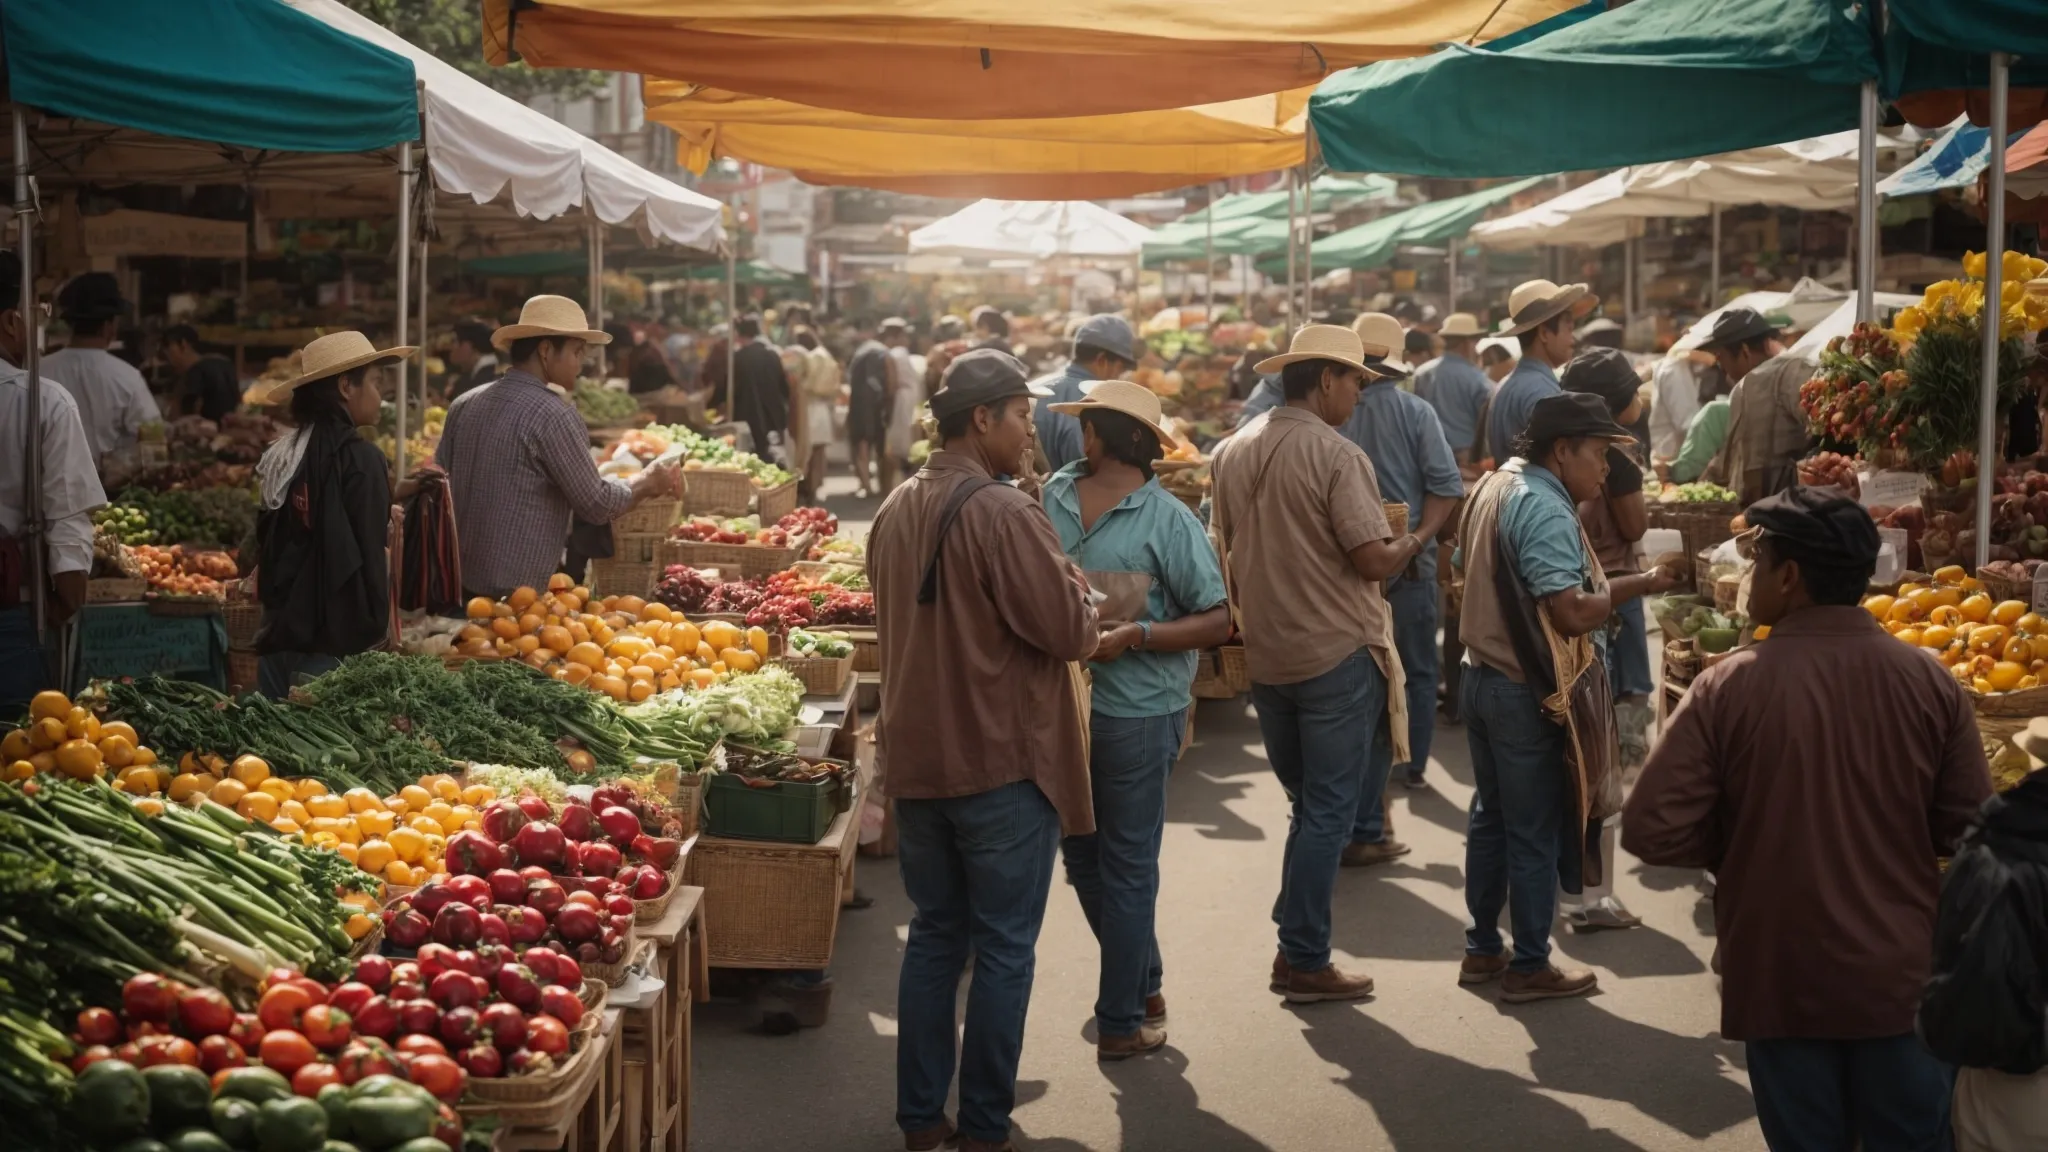 a bustling local farmer's market with vendors actively interacting with customers against a backdrop of colorful fresh produce stalls.